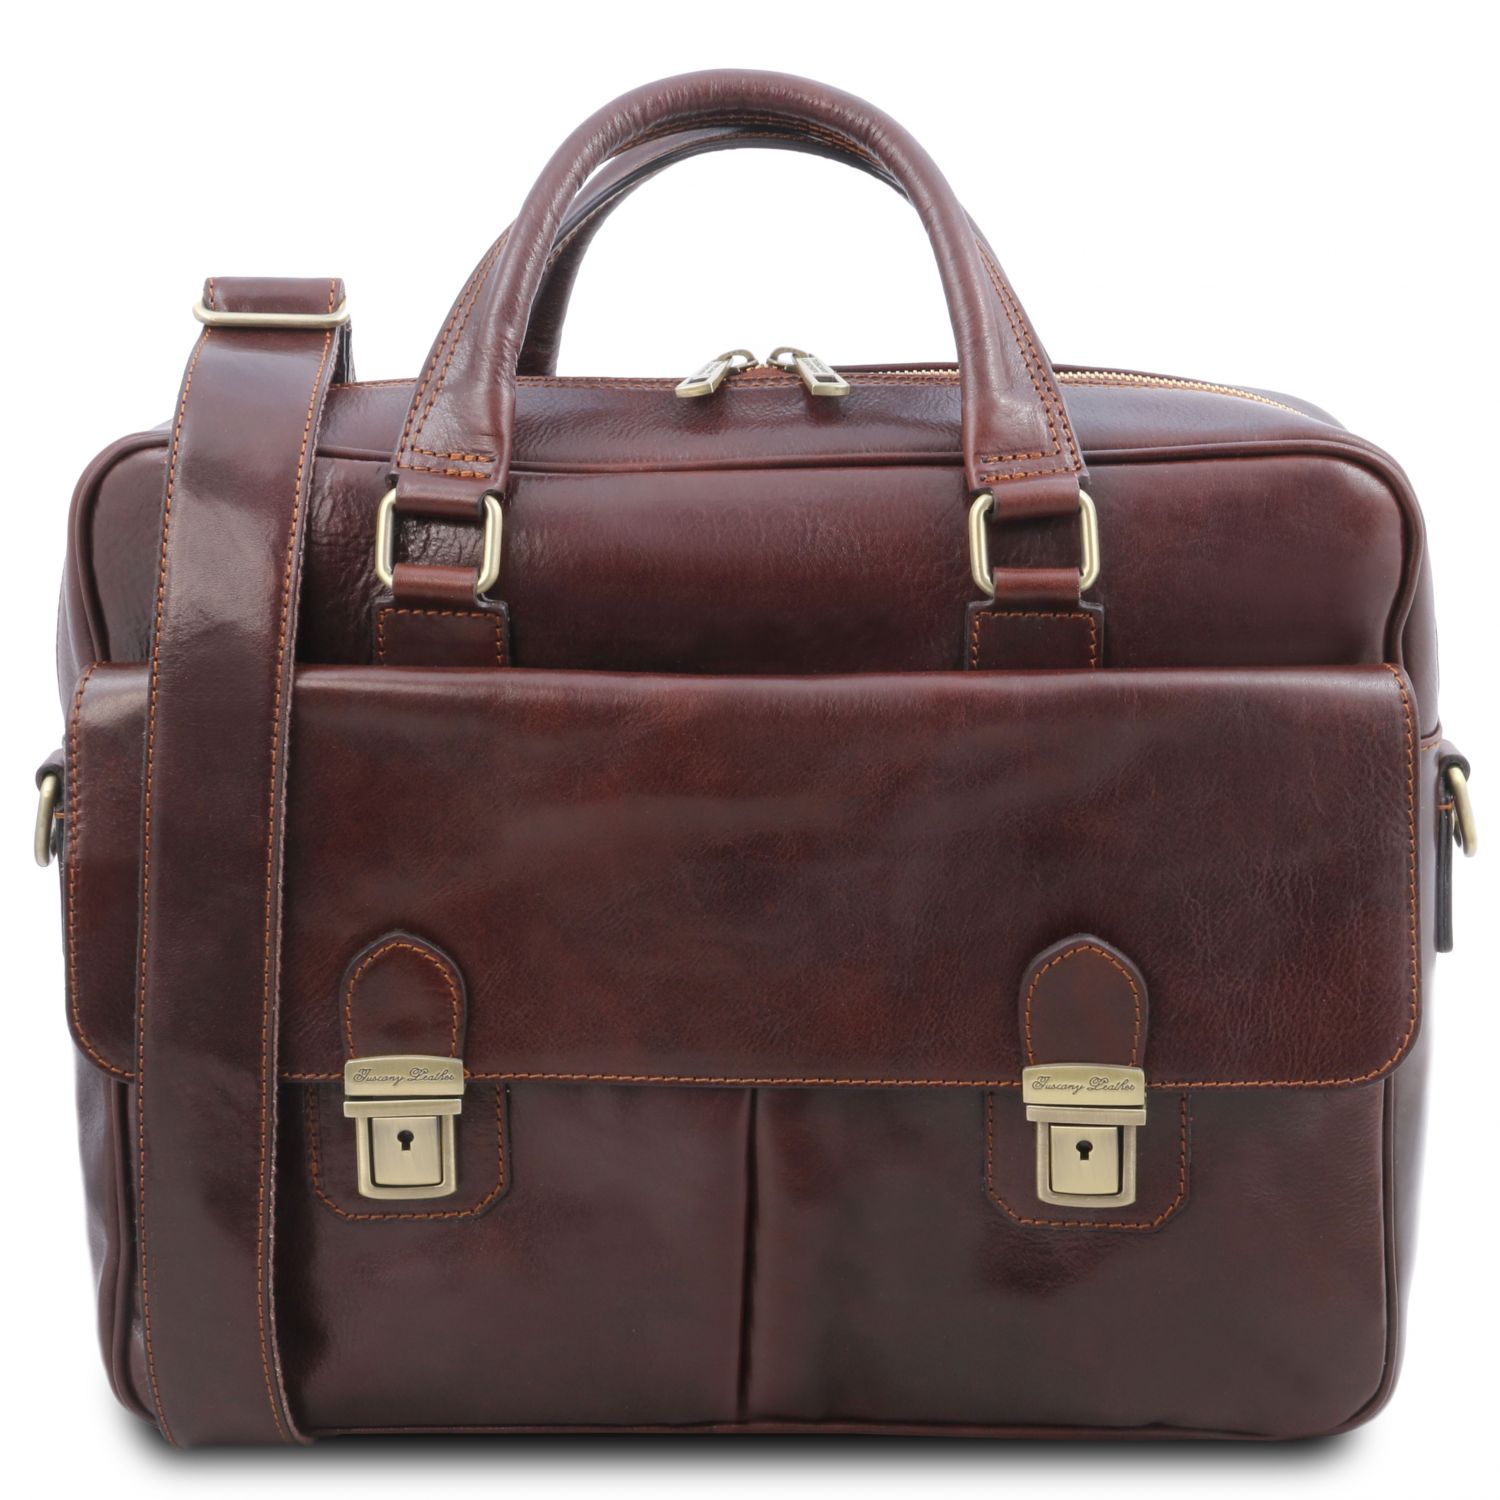 Leather Multi Compartment Laptop Briefcase With Two Front Pockets - San Miniato